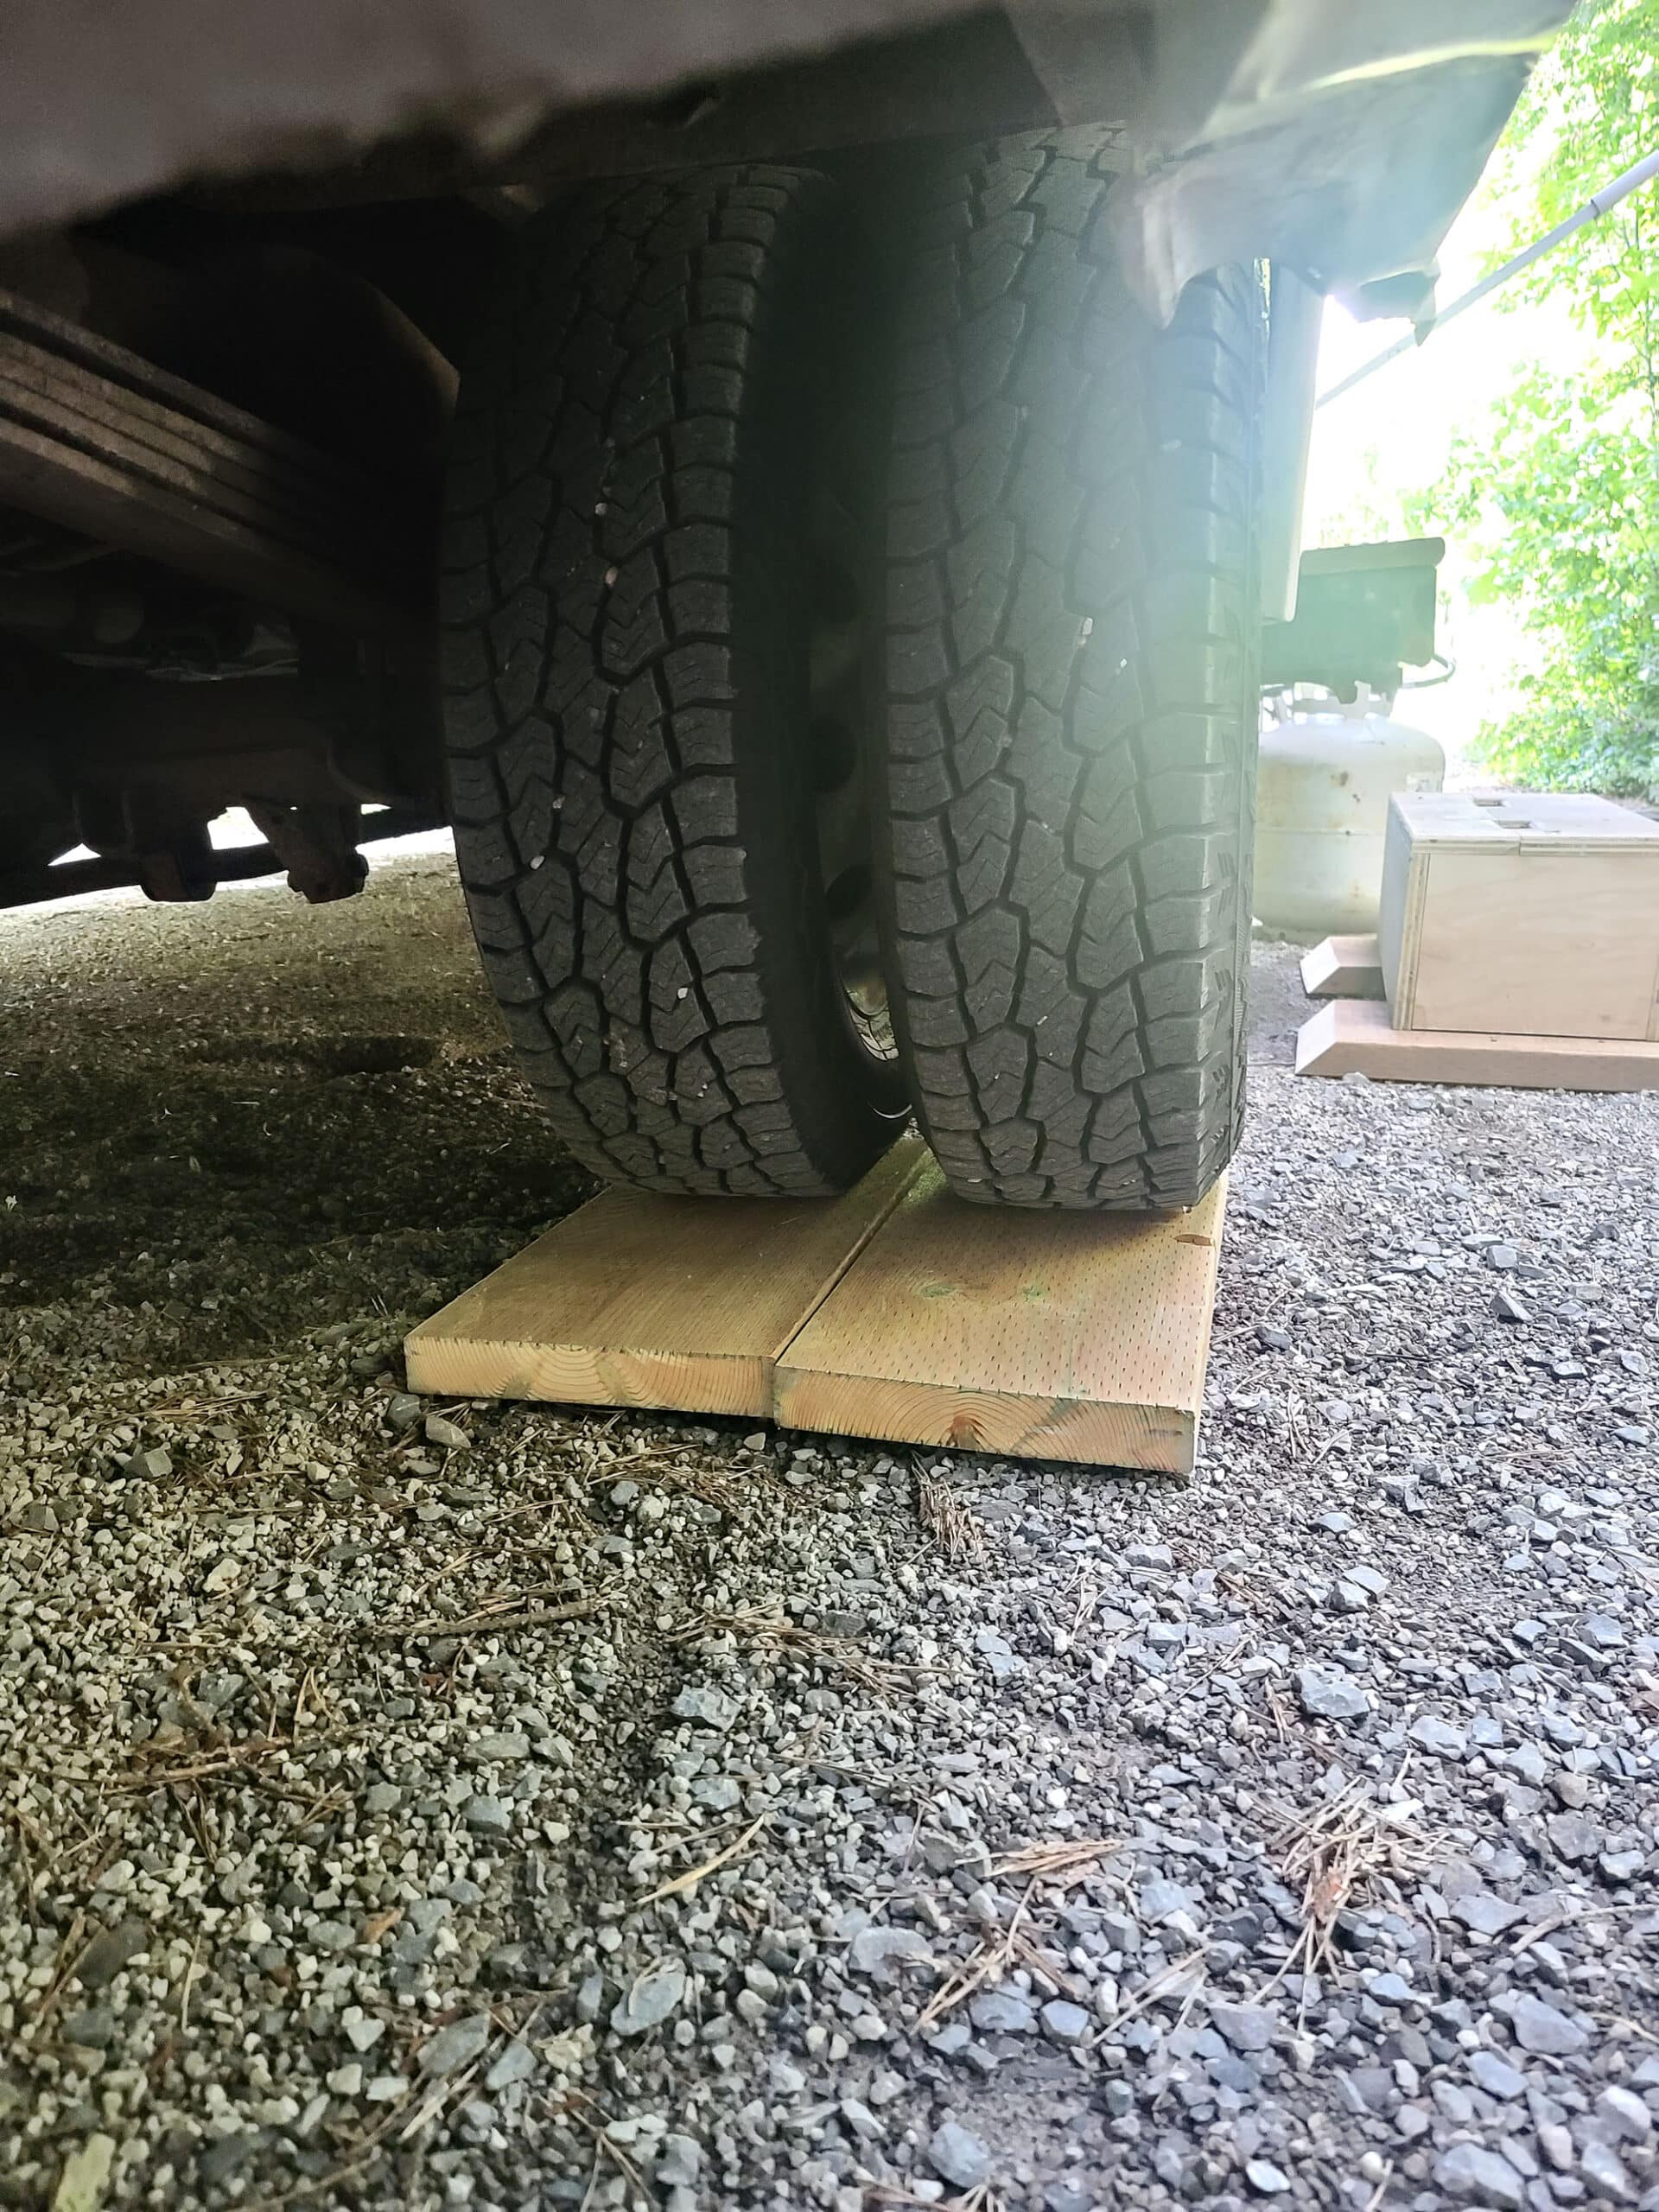 A low view under a motorhome looking at the dual rear tires.  Under each tire is a 2x10 board.